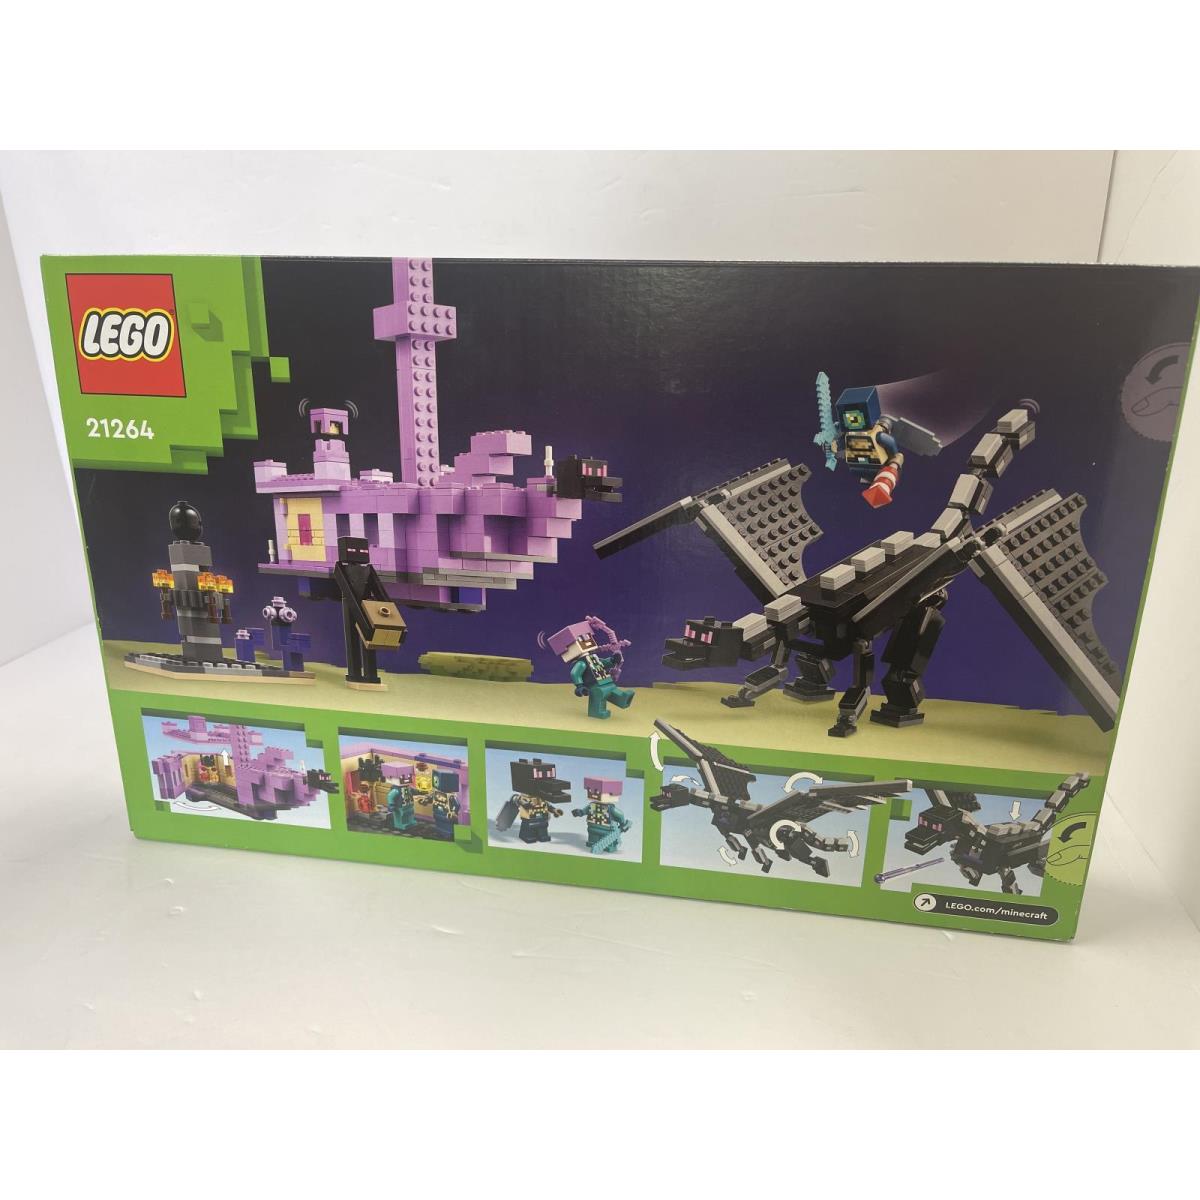 Lego 21264 Minecraft The Ender Dragon and End Ship 657 Pcs Set 6470614